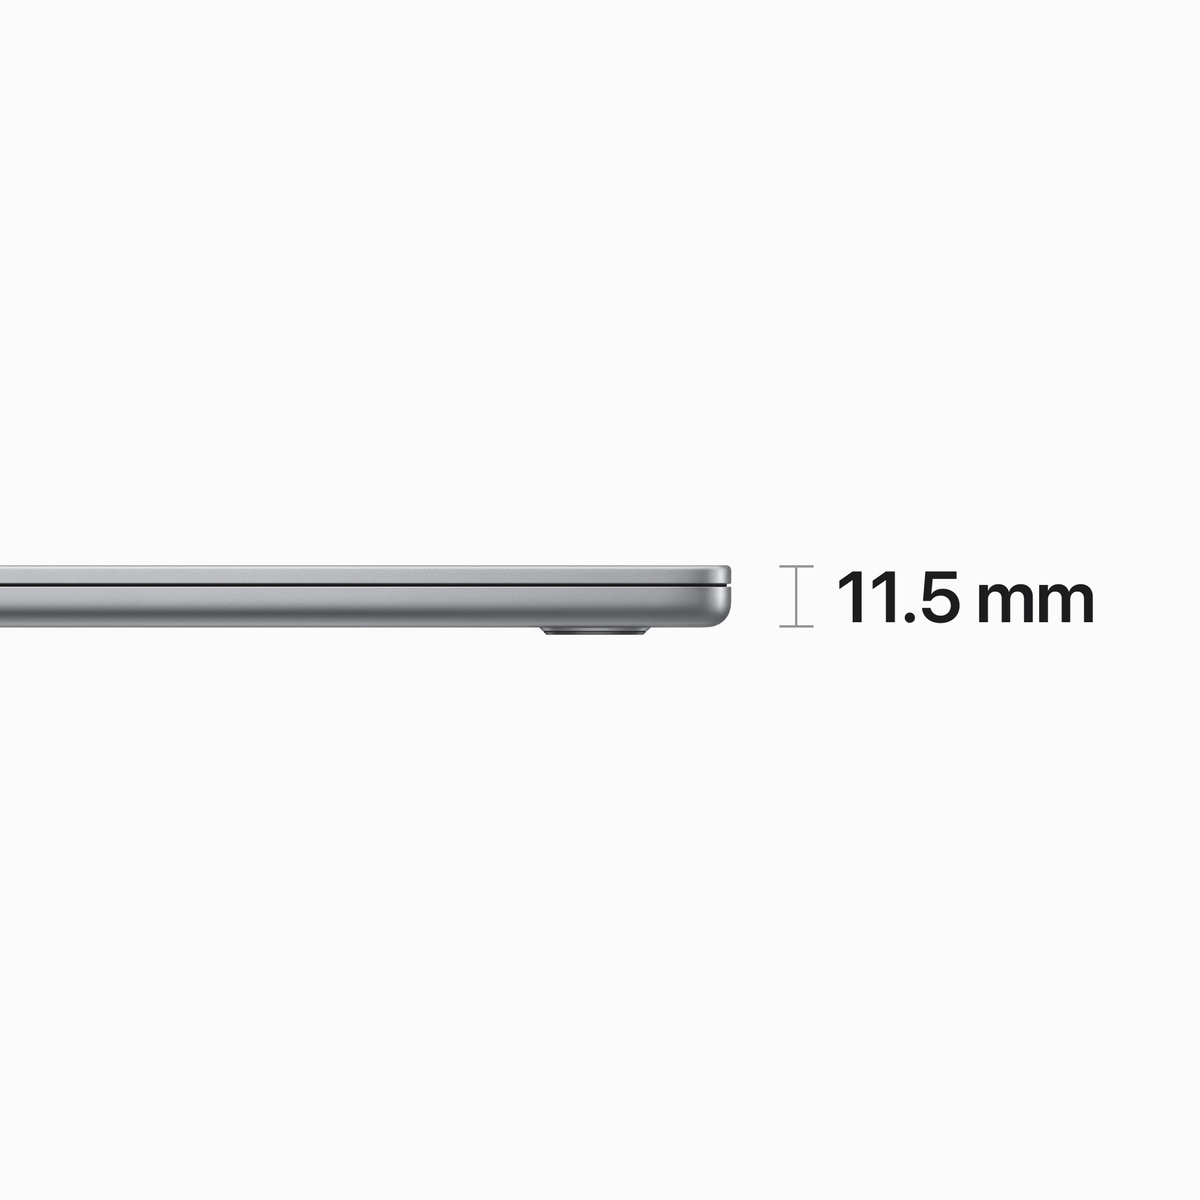 Apple MacBook Air M2 Chip, 15-inches, 8 GB RAM, 256 GB Storage, Space Gray, MQKP3ZS/A